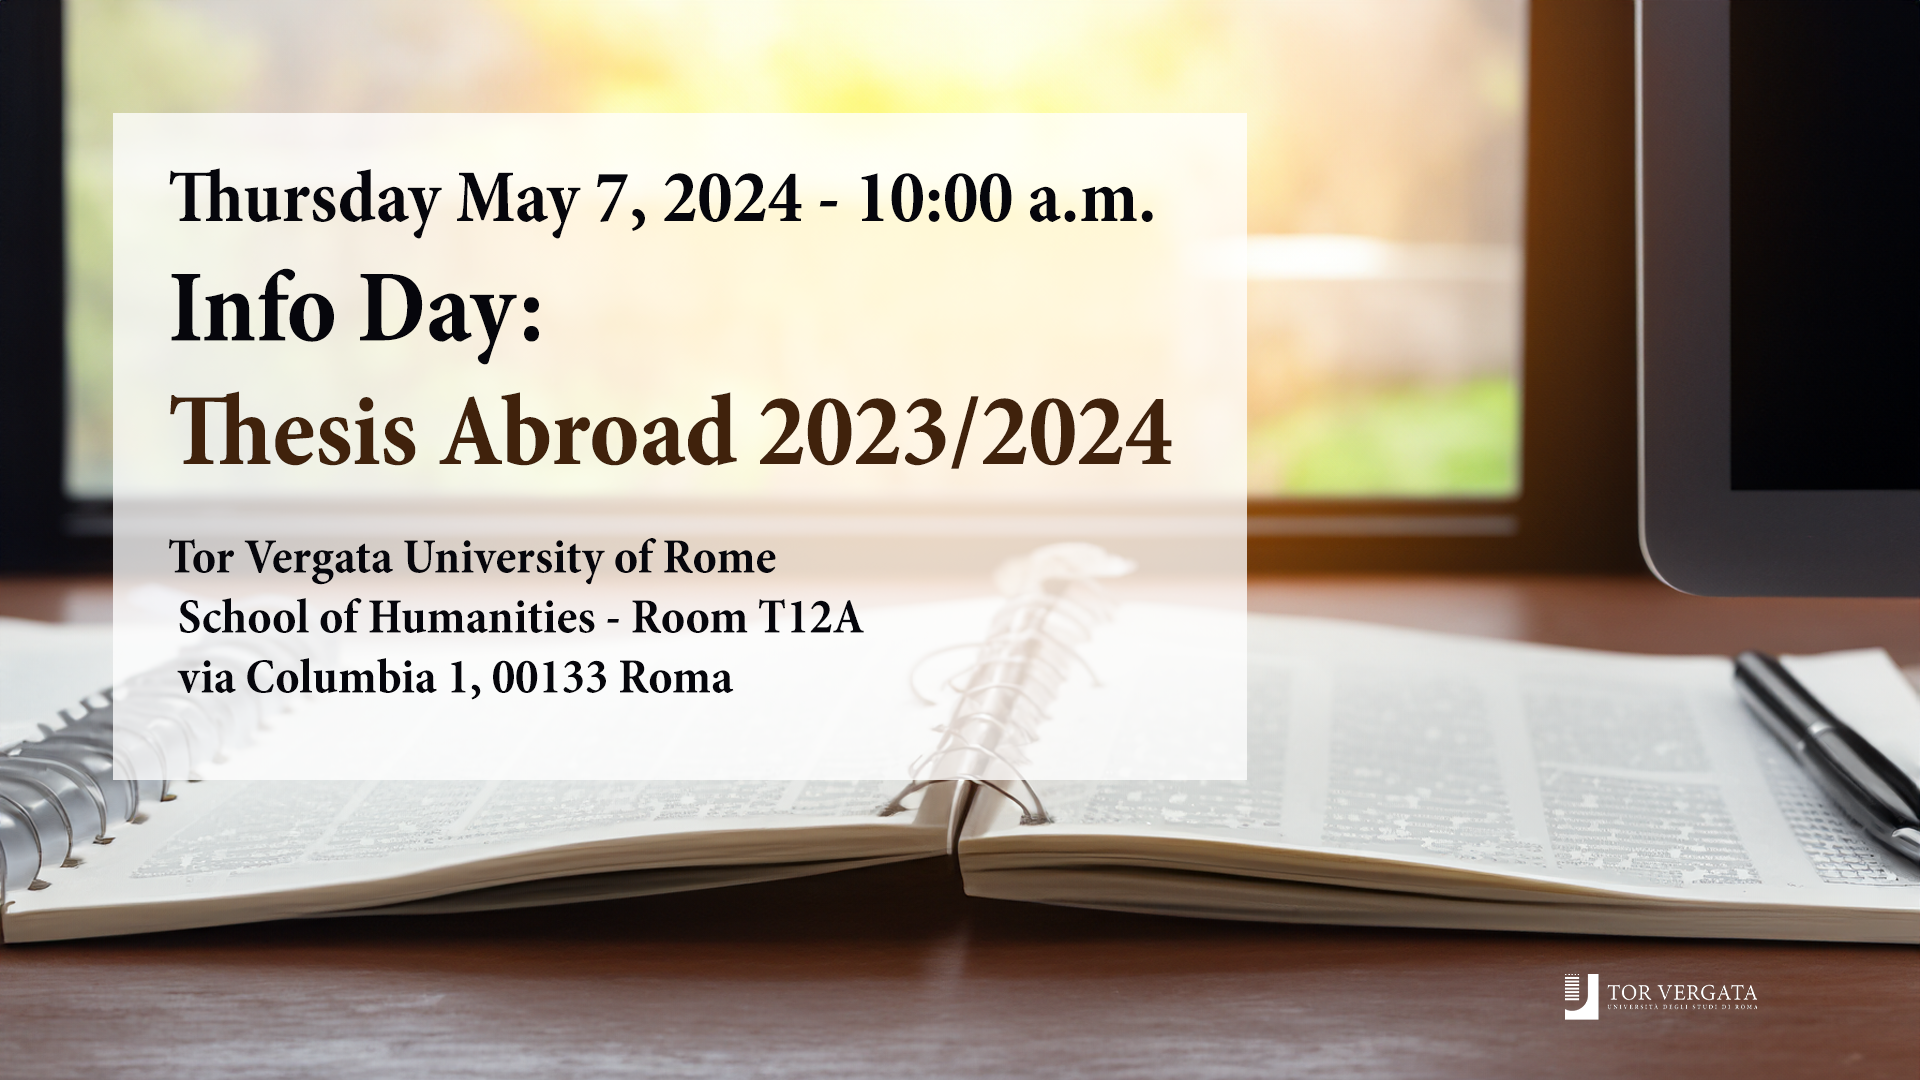 infoday thesis abroad